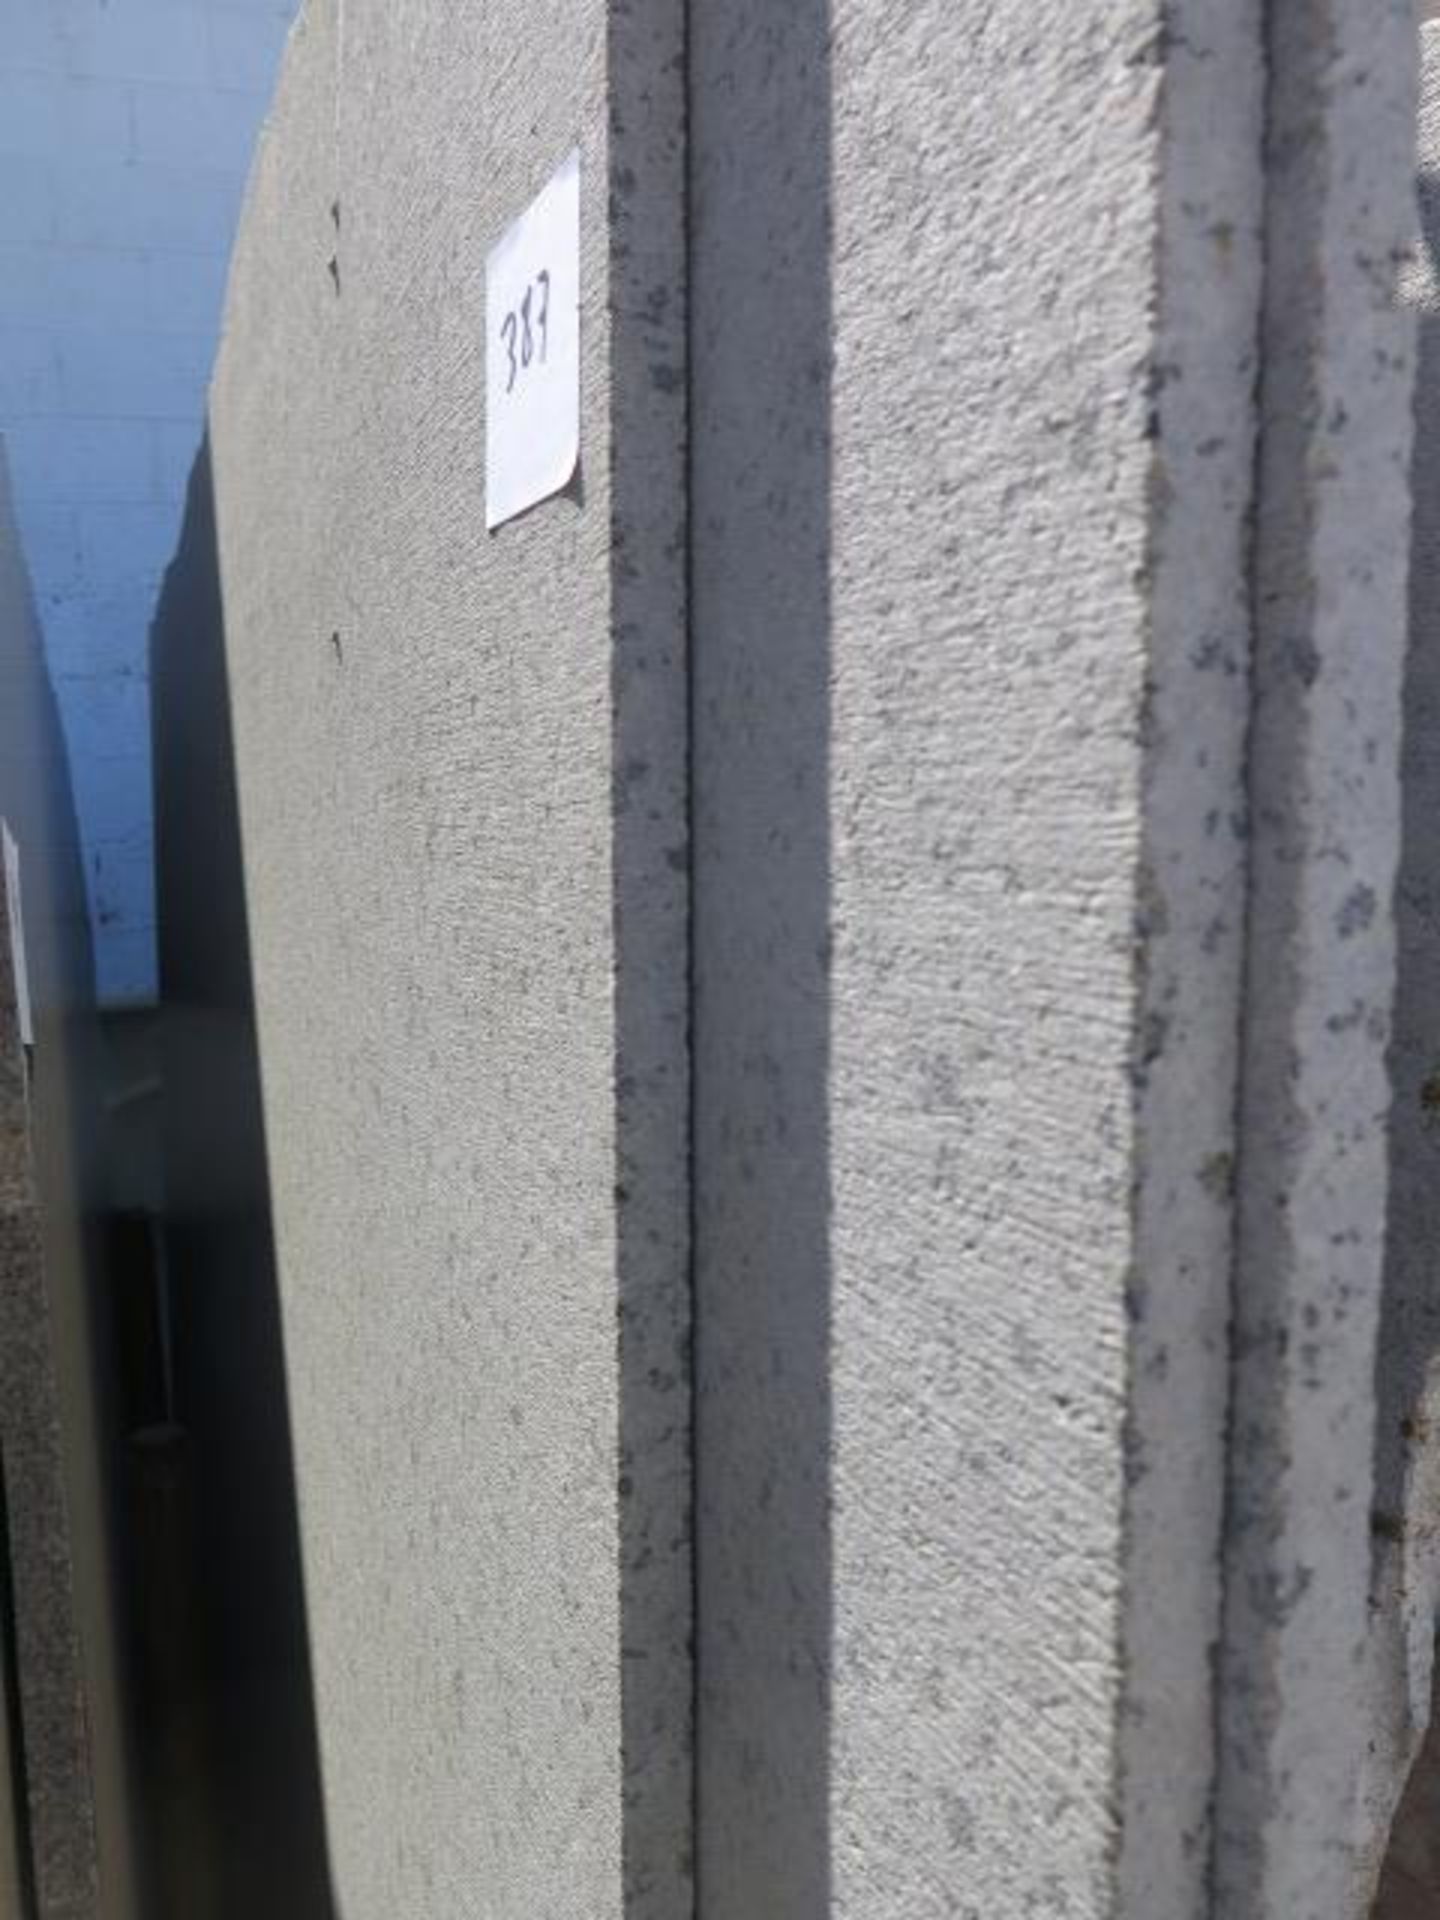 Tuna Green Granite (3 Slabs) (SOLD AS-IS - NO WARRANTY) - Image 3 of 5